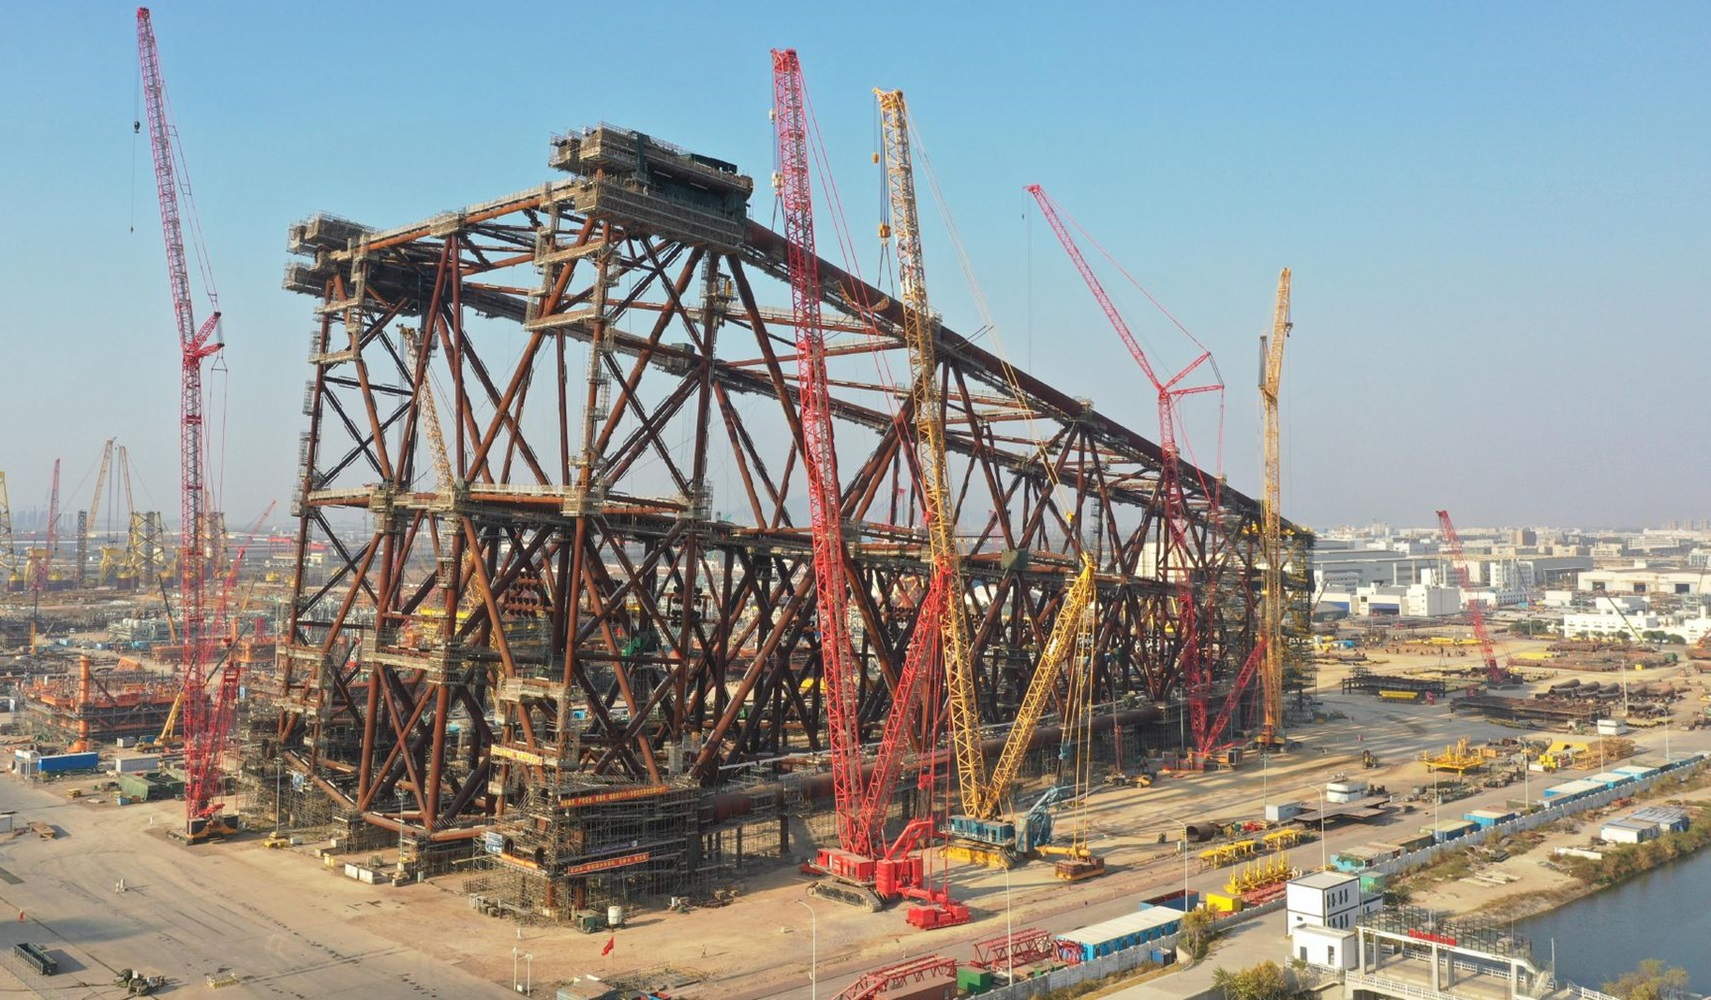 completion-of-a-302m-long-oil-platform-foundation-in-china